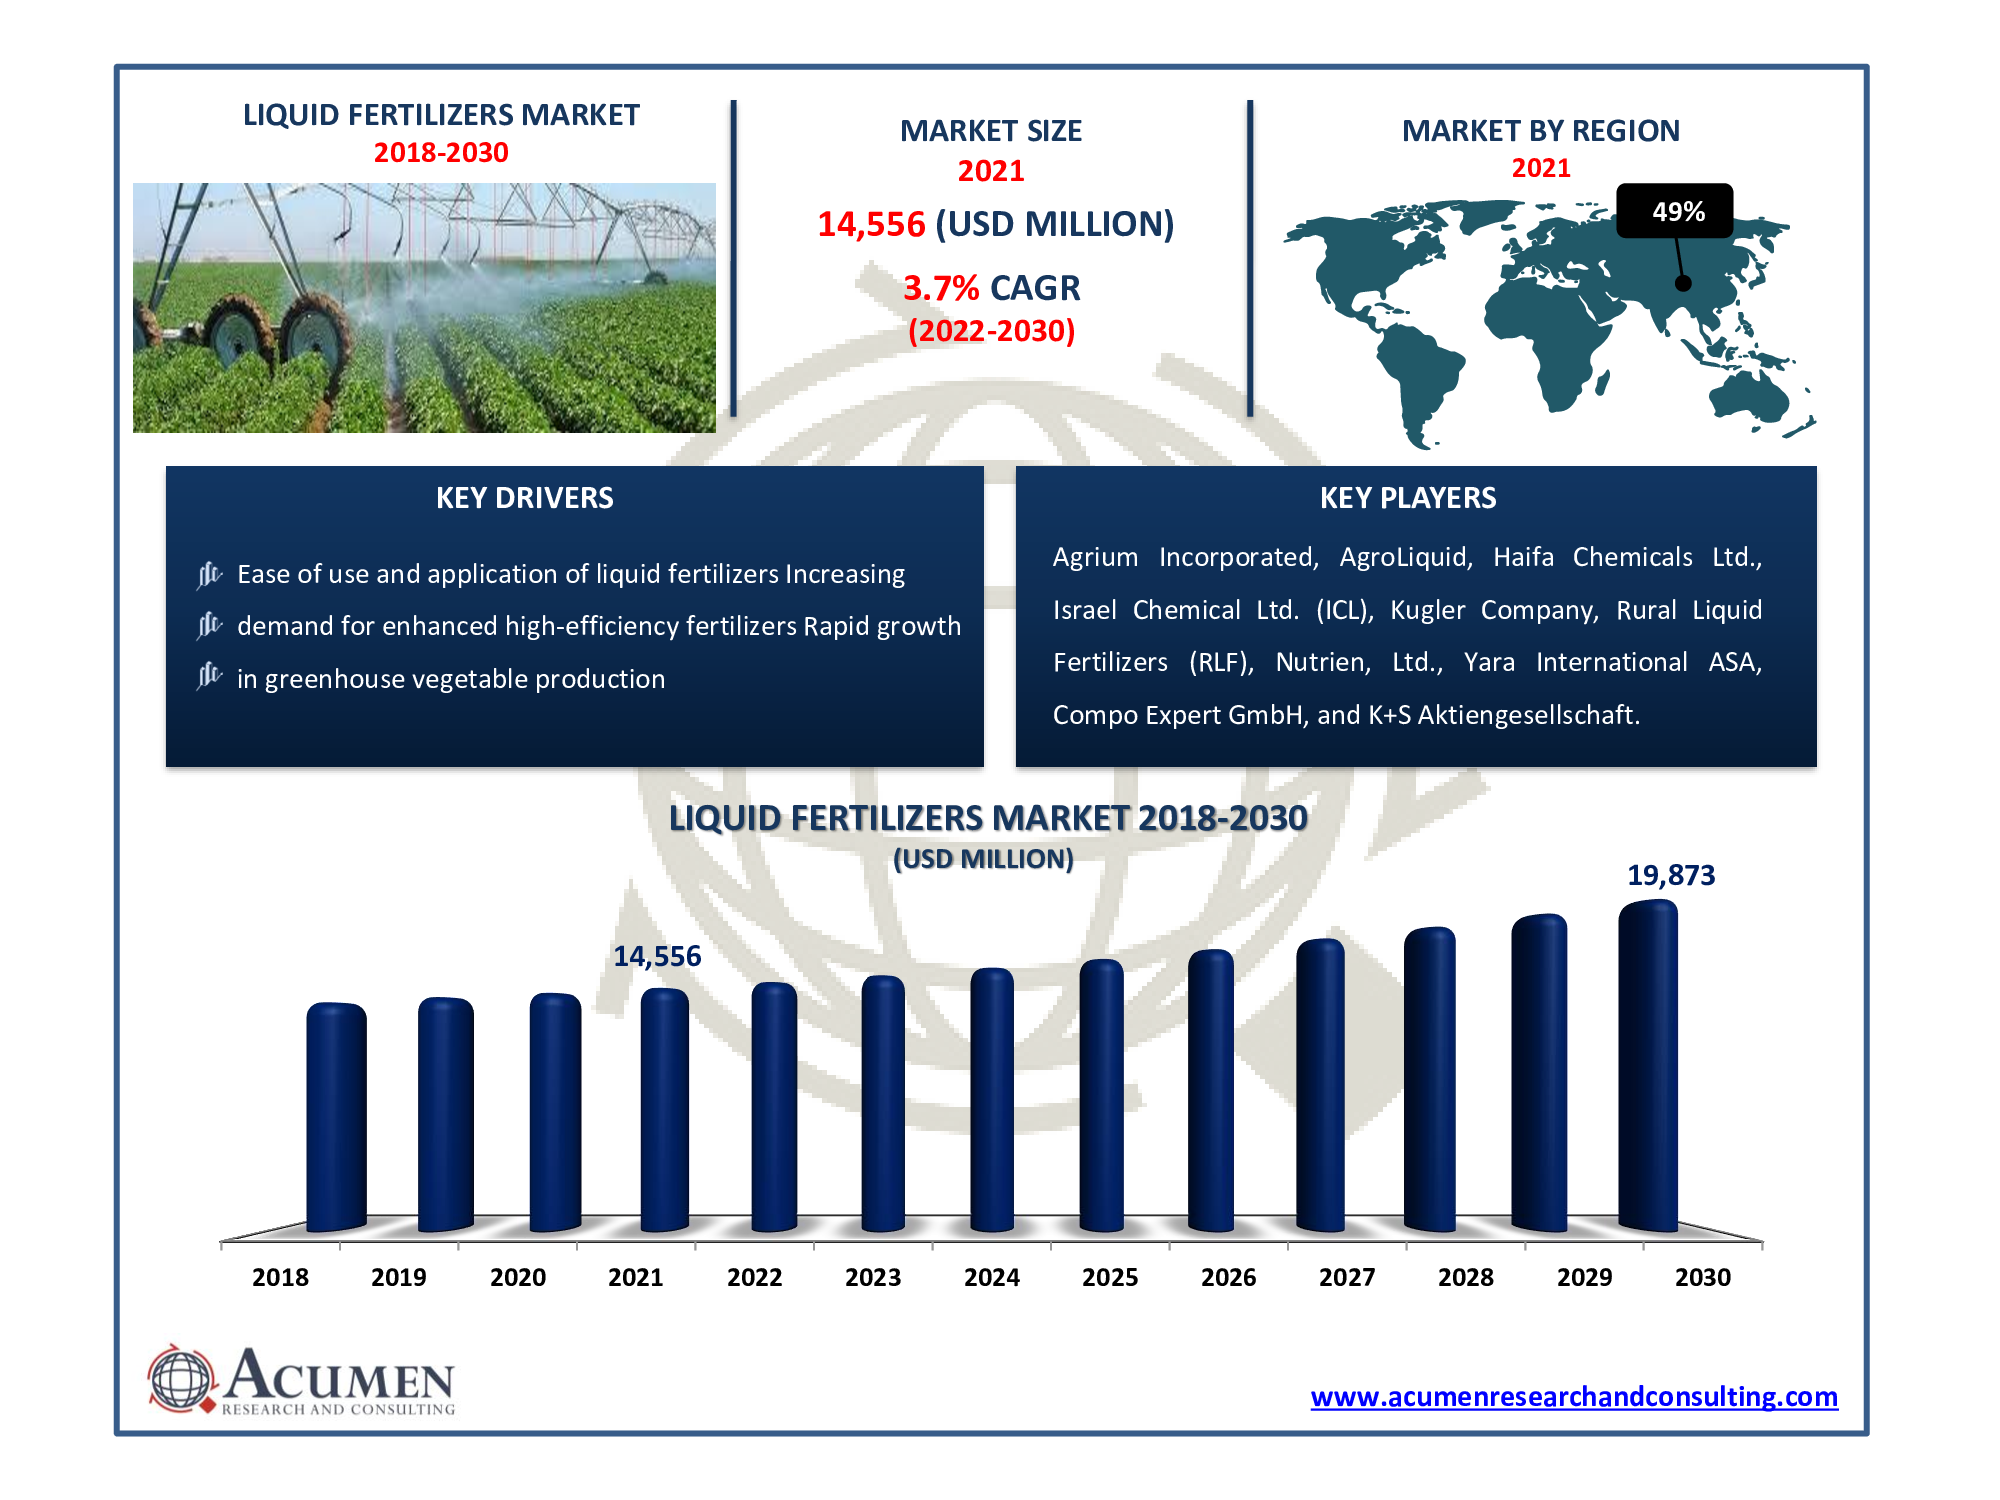 Liquid Fertilizers Market size was accounted for USD 14,556 Million in 2021 and is expected to reach the value of USD 19,873 Million by 2030, at a CAGR of 3.7% from 2022 to 2030.